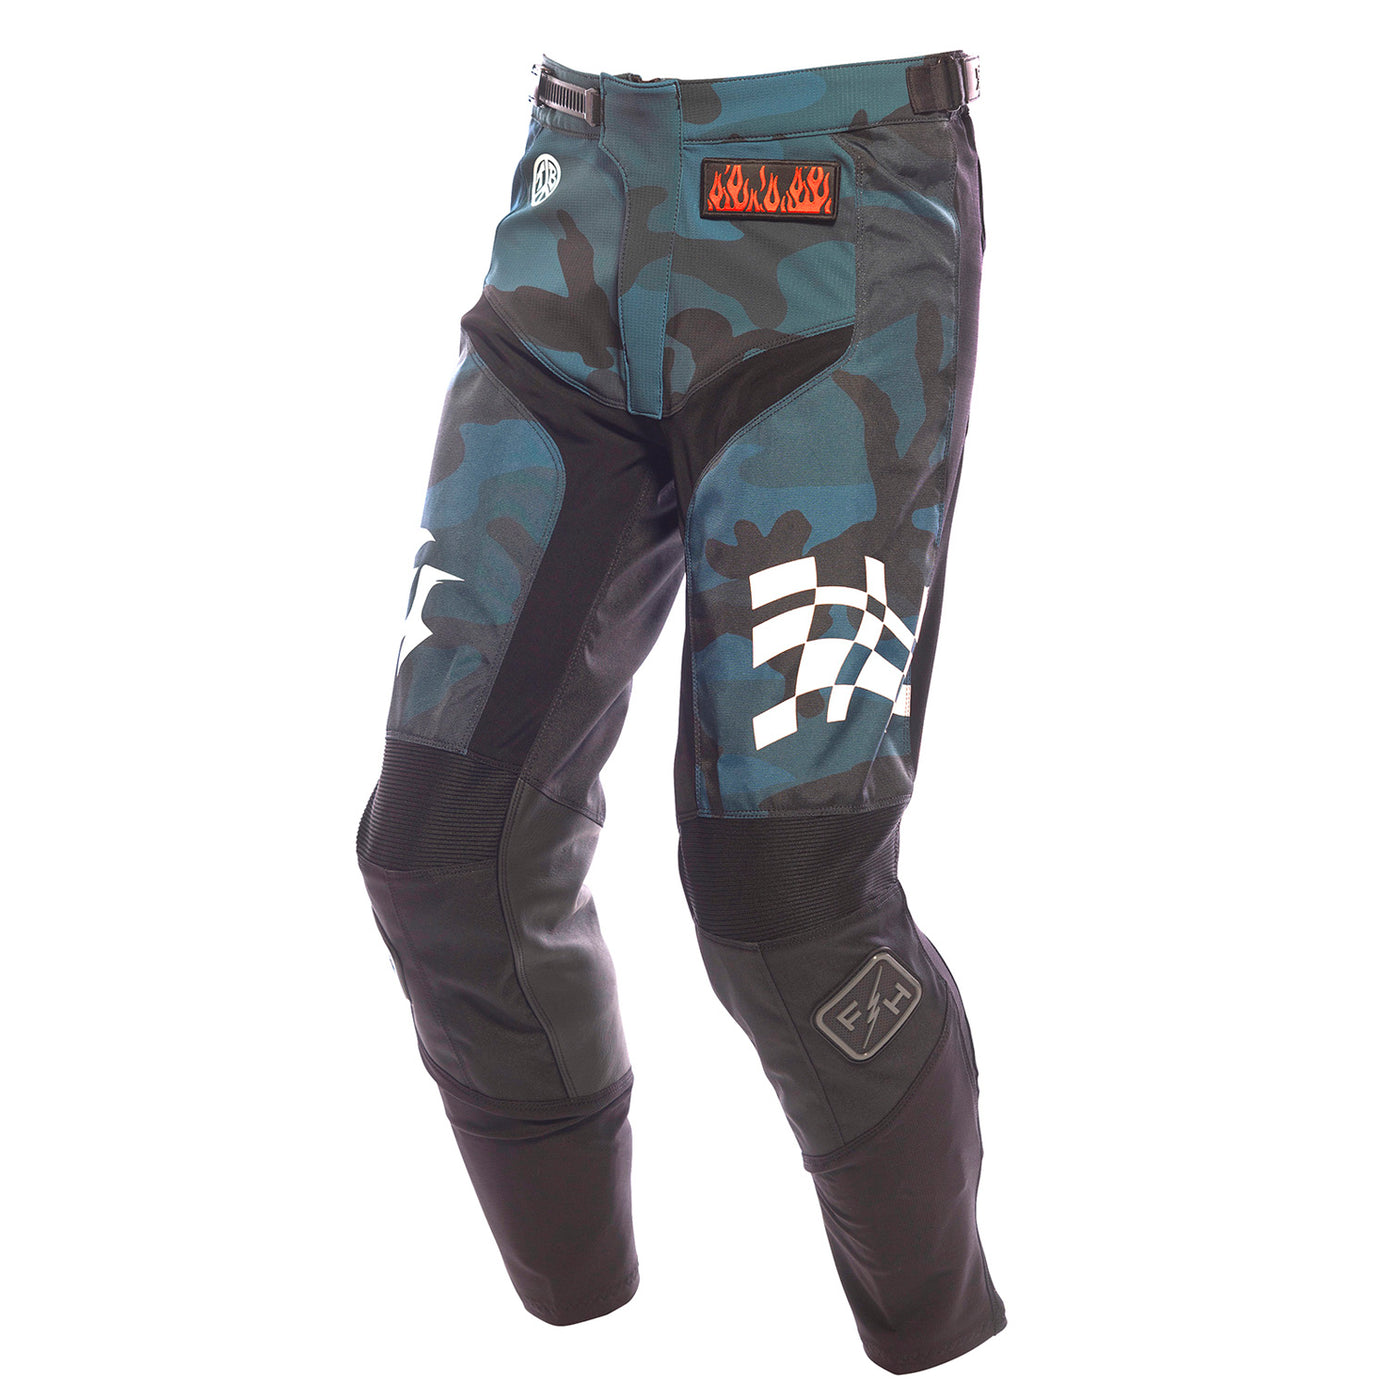 Fasthouse Grindhouse Bereman Pant